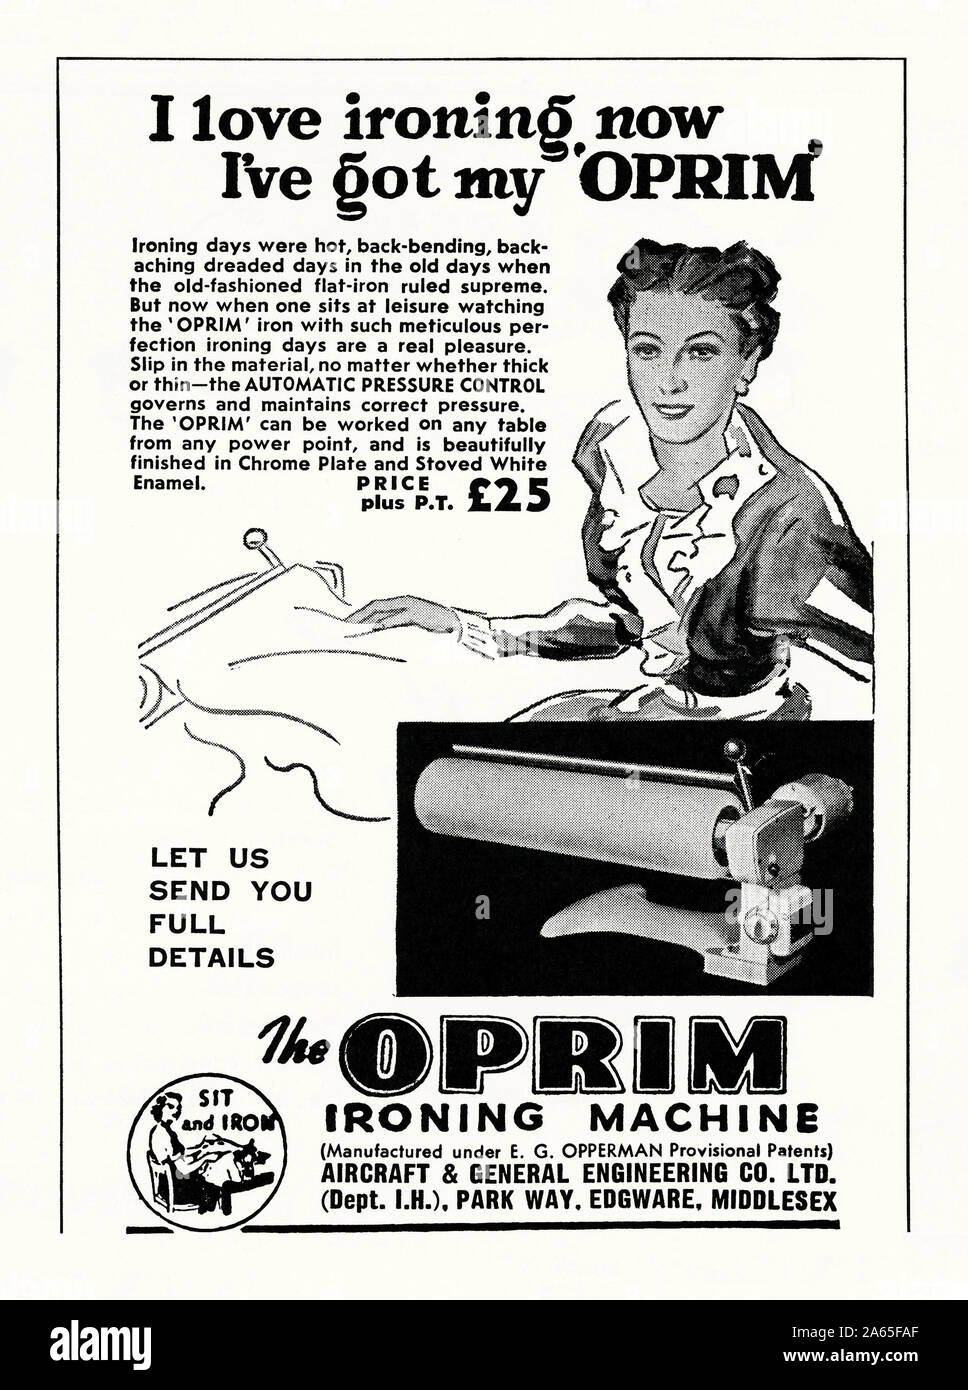 Advert for the Oprim Ironing Machine, 1951. The woman illustrated in the advert claims because of using the Oprim she has now got to 'love ironing'. The electric, rotary table-top ironer was made by Aircraft and General Engineering Company Ltd, Edgware, Middlesex, England, UK from around 1950. Feeding clothes through the machine was claimed to be far quicker than the traditional flat iron. Stock Photo